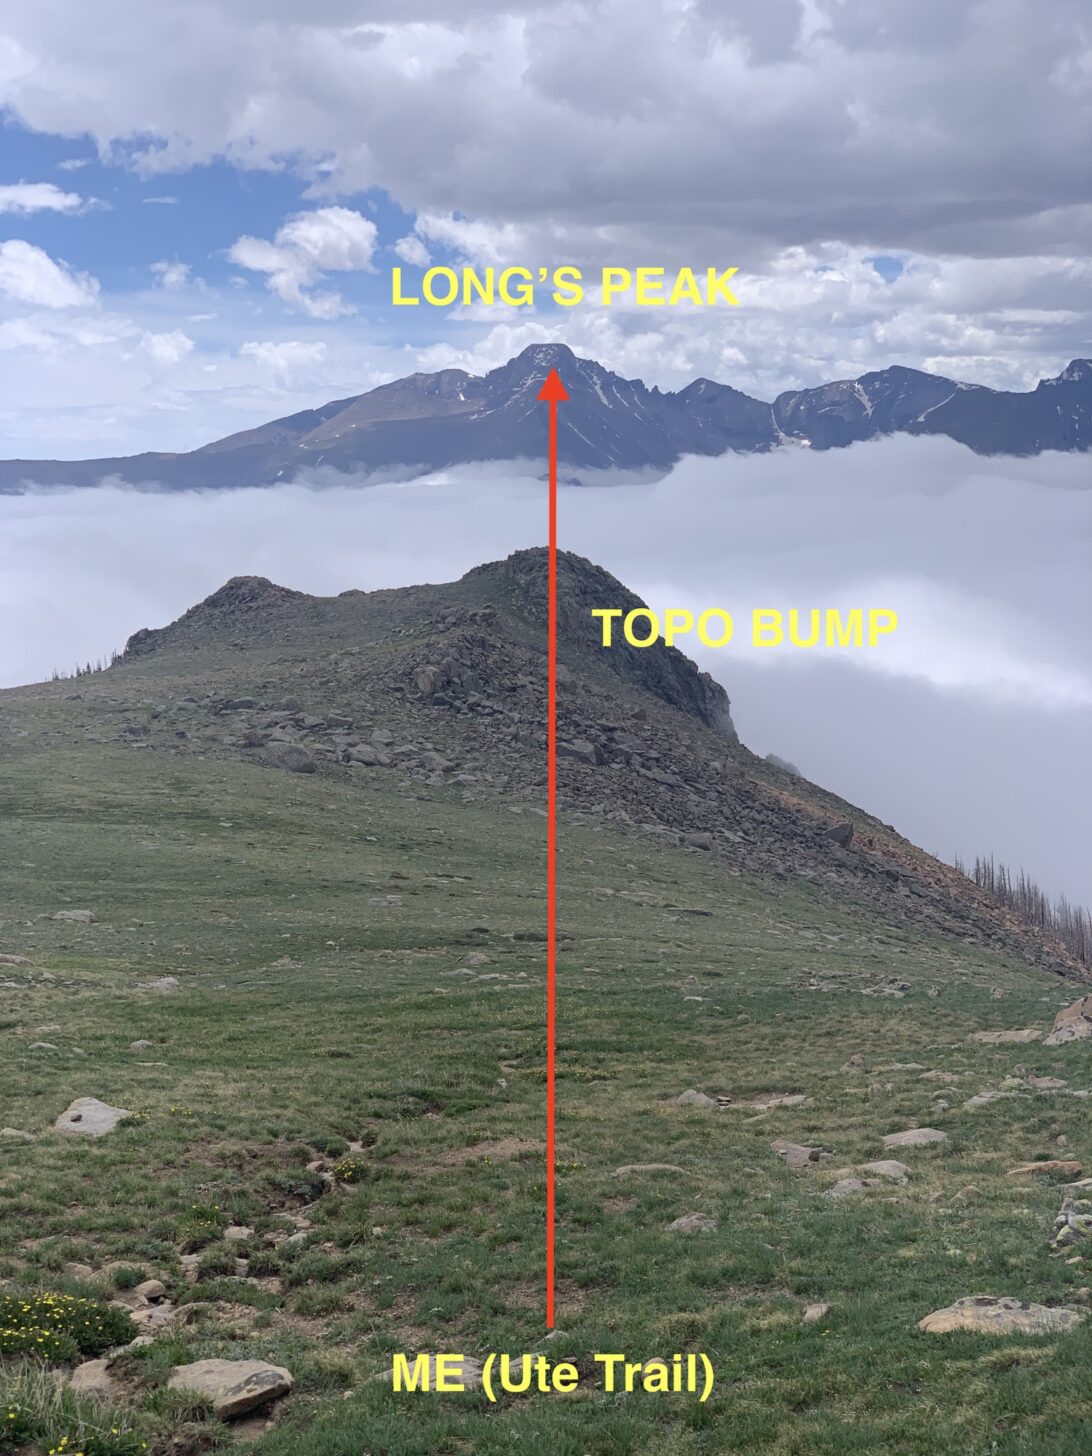 Position fix: at the intersection of the Ute Trail (LOP #1) and a sight line (LOP #2) intersecting me, a topo bump, and Long's Peak.